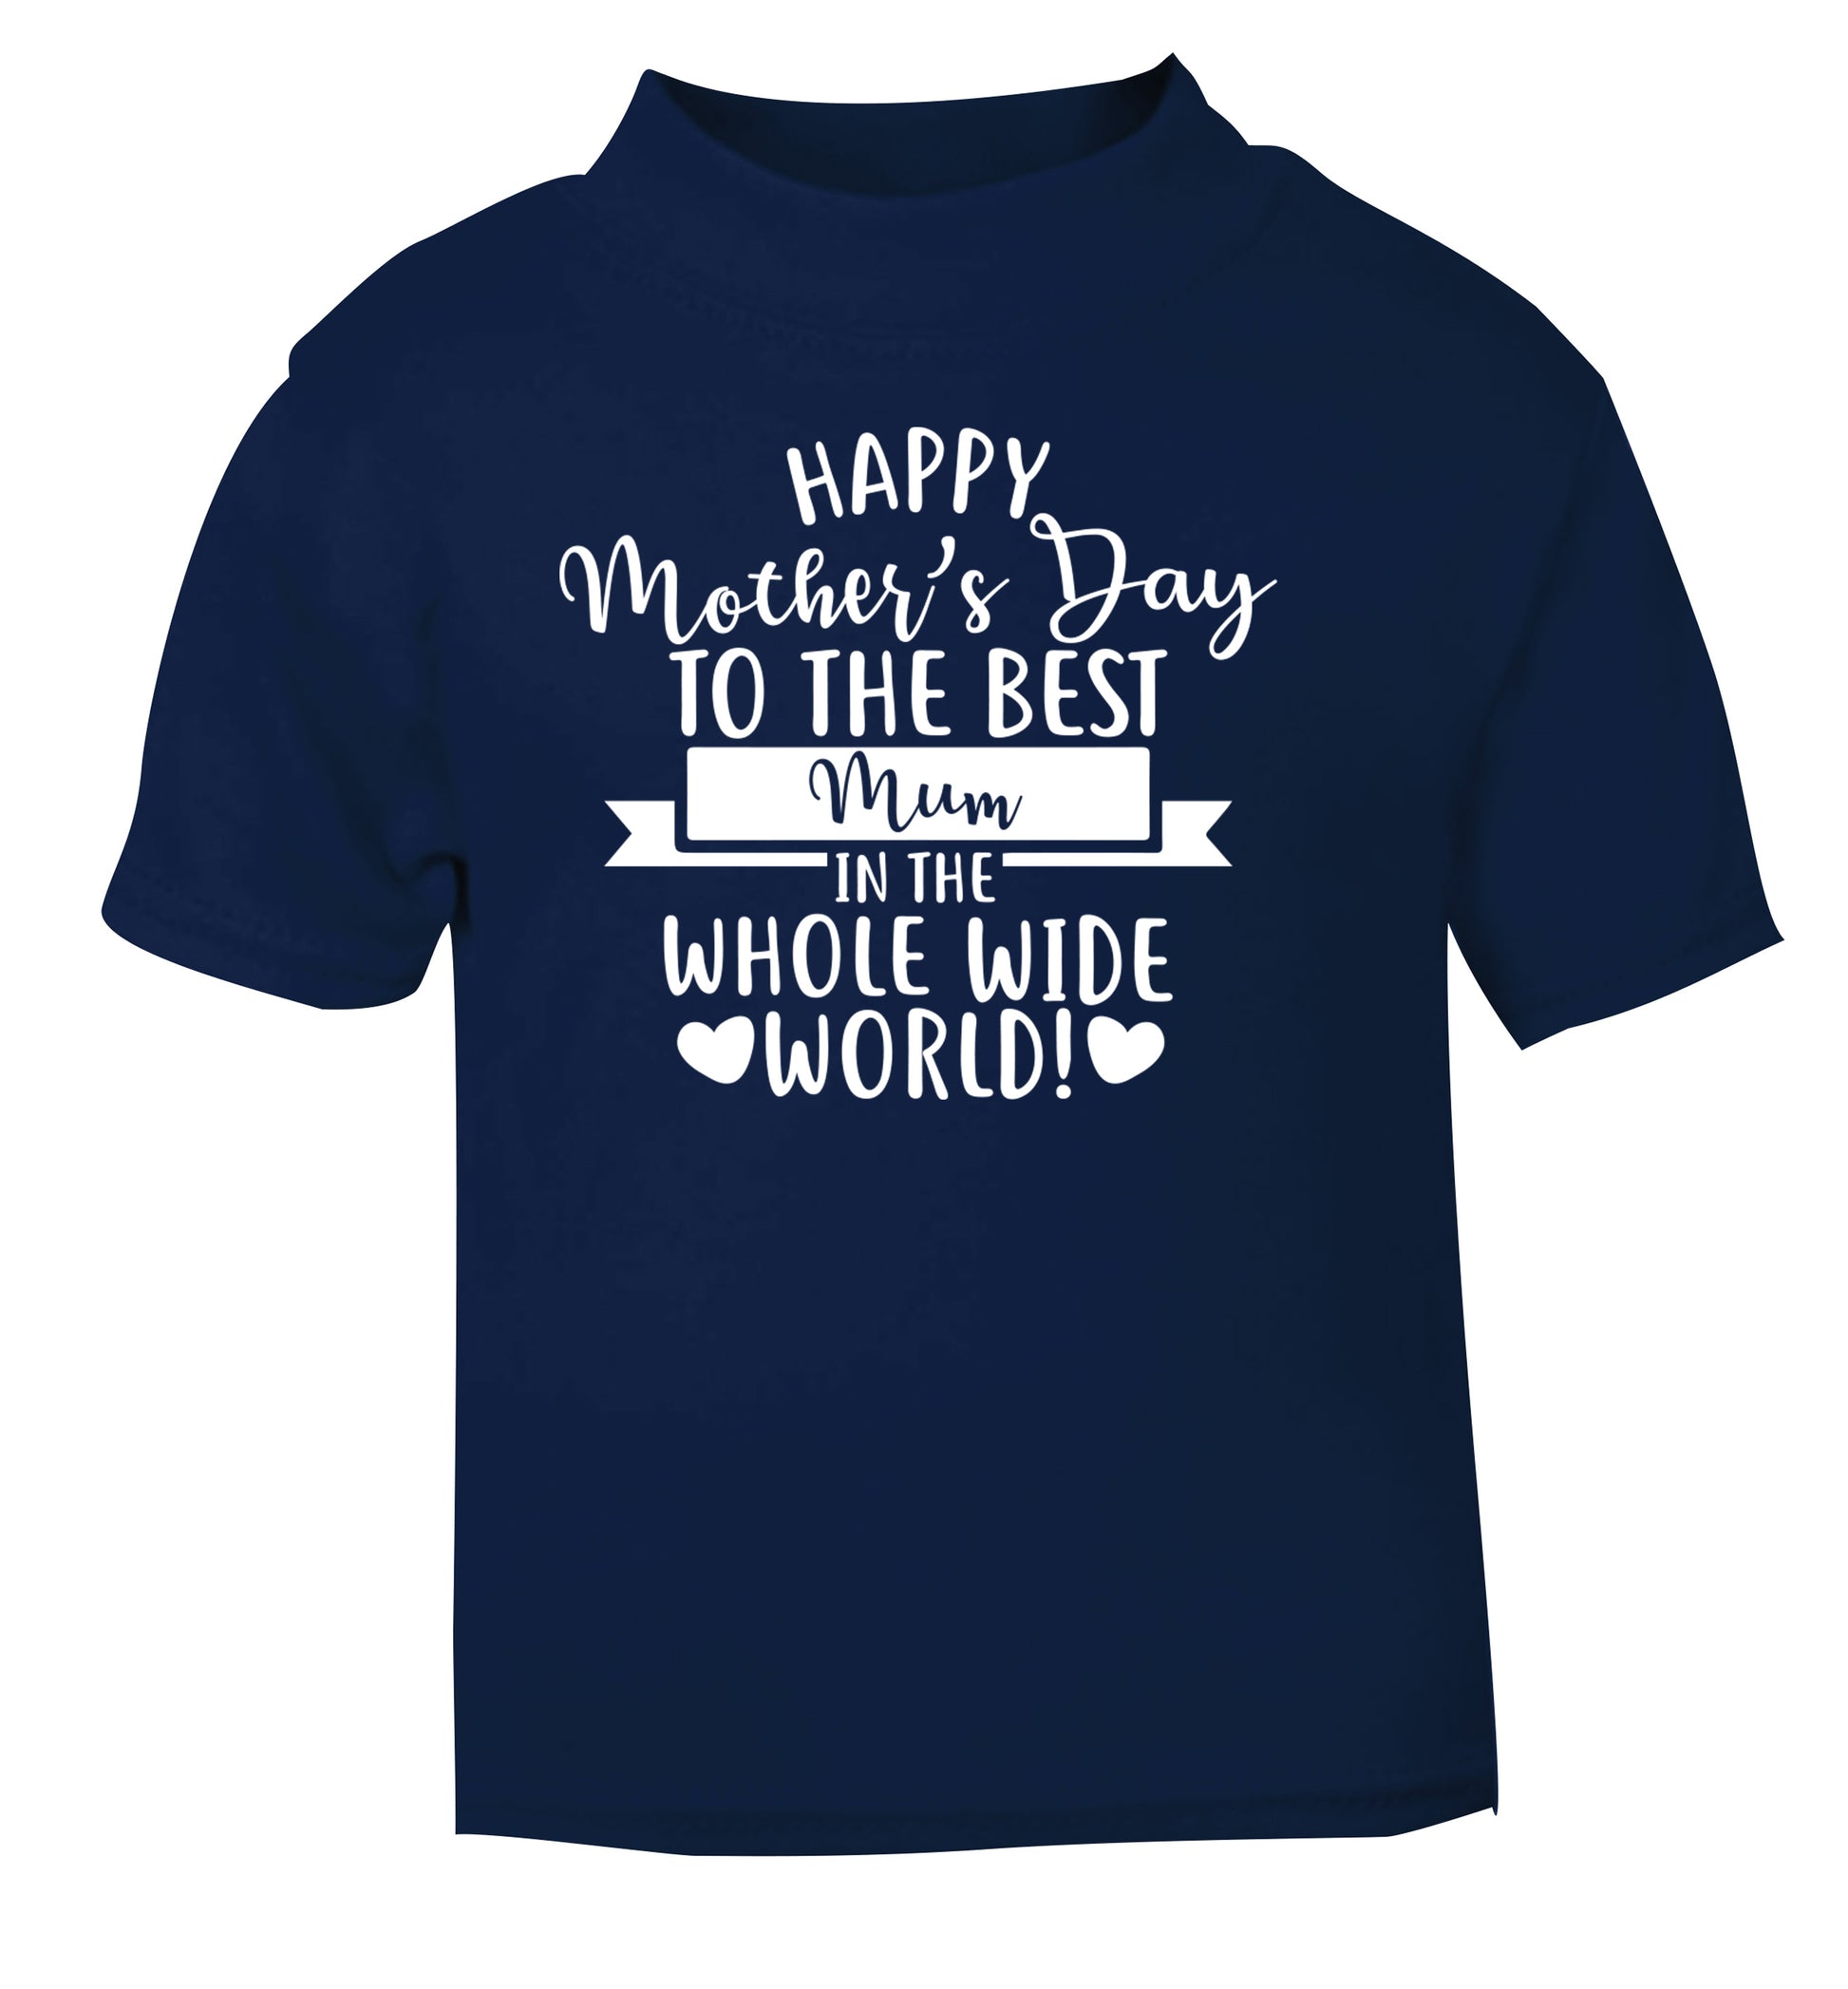 Happy Mother's Day to the best mum in the whole wide world! navy Baby Toddler Tshirt 2 Years